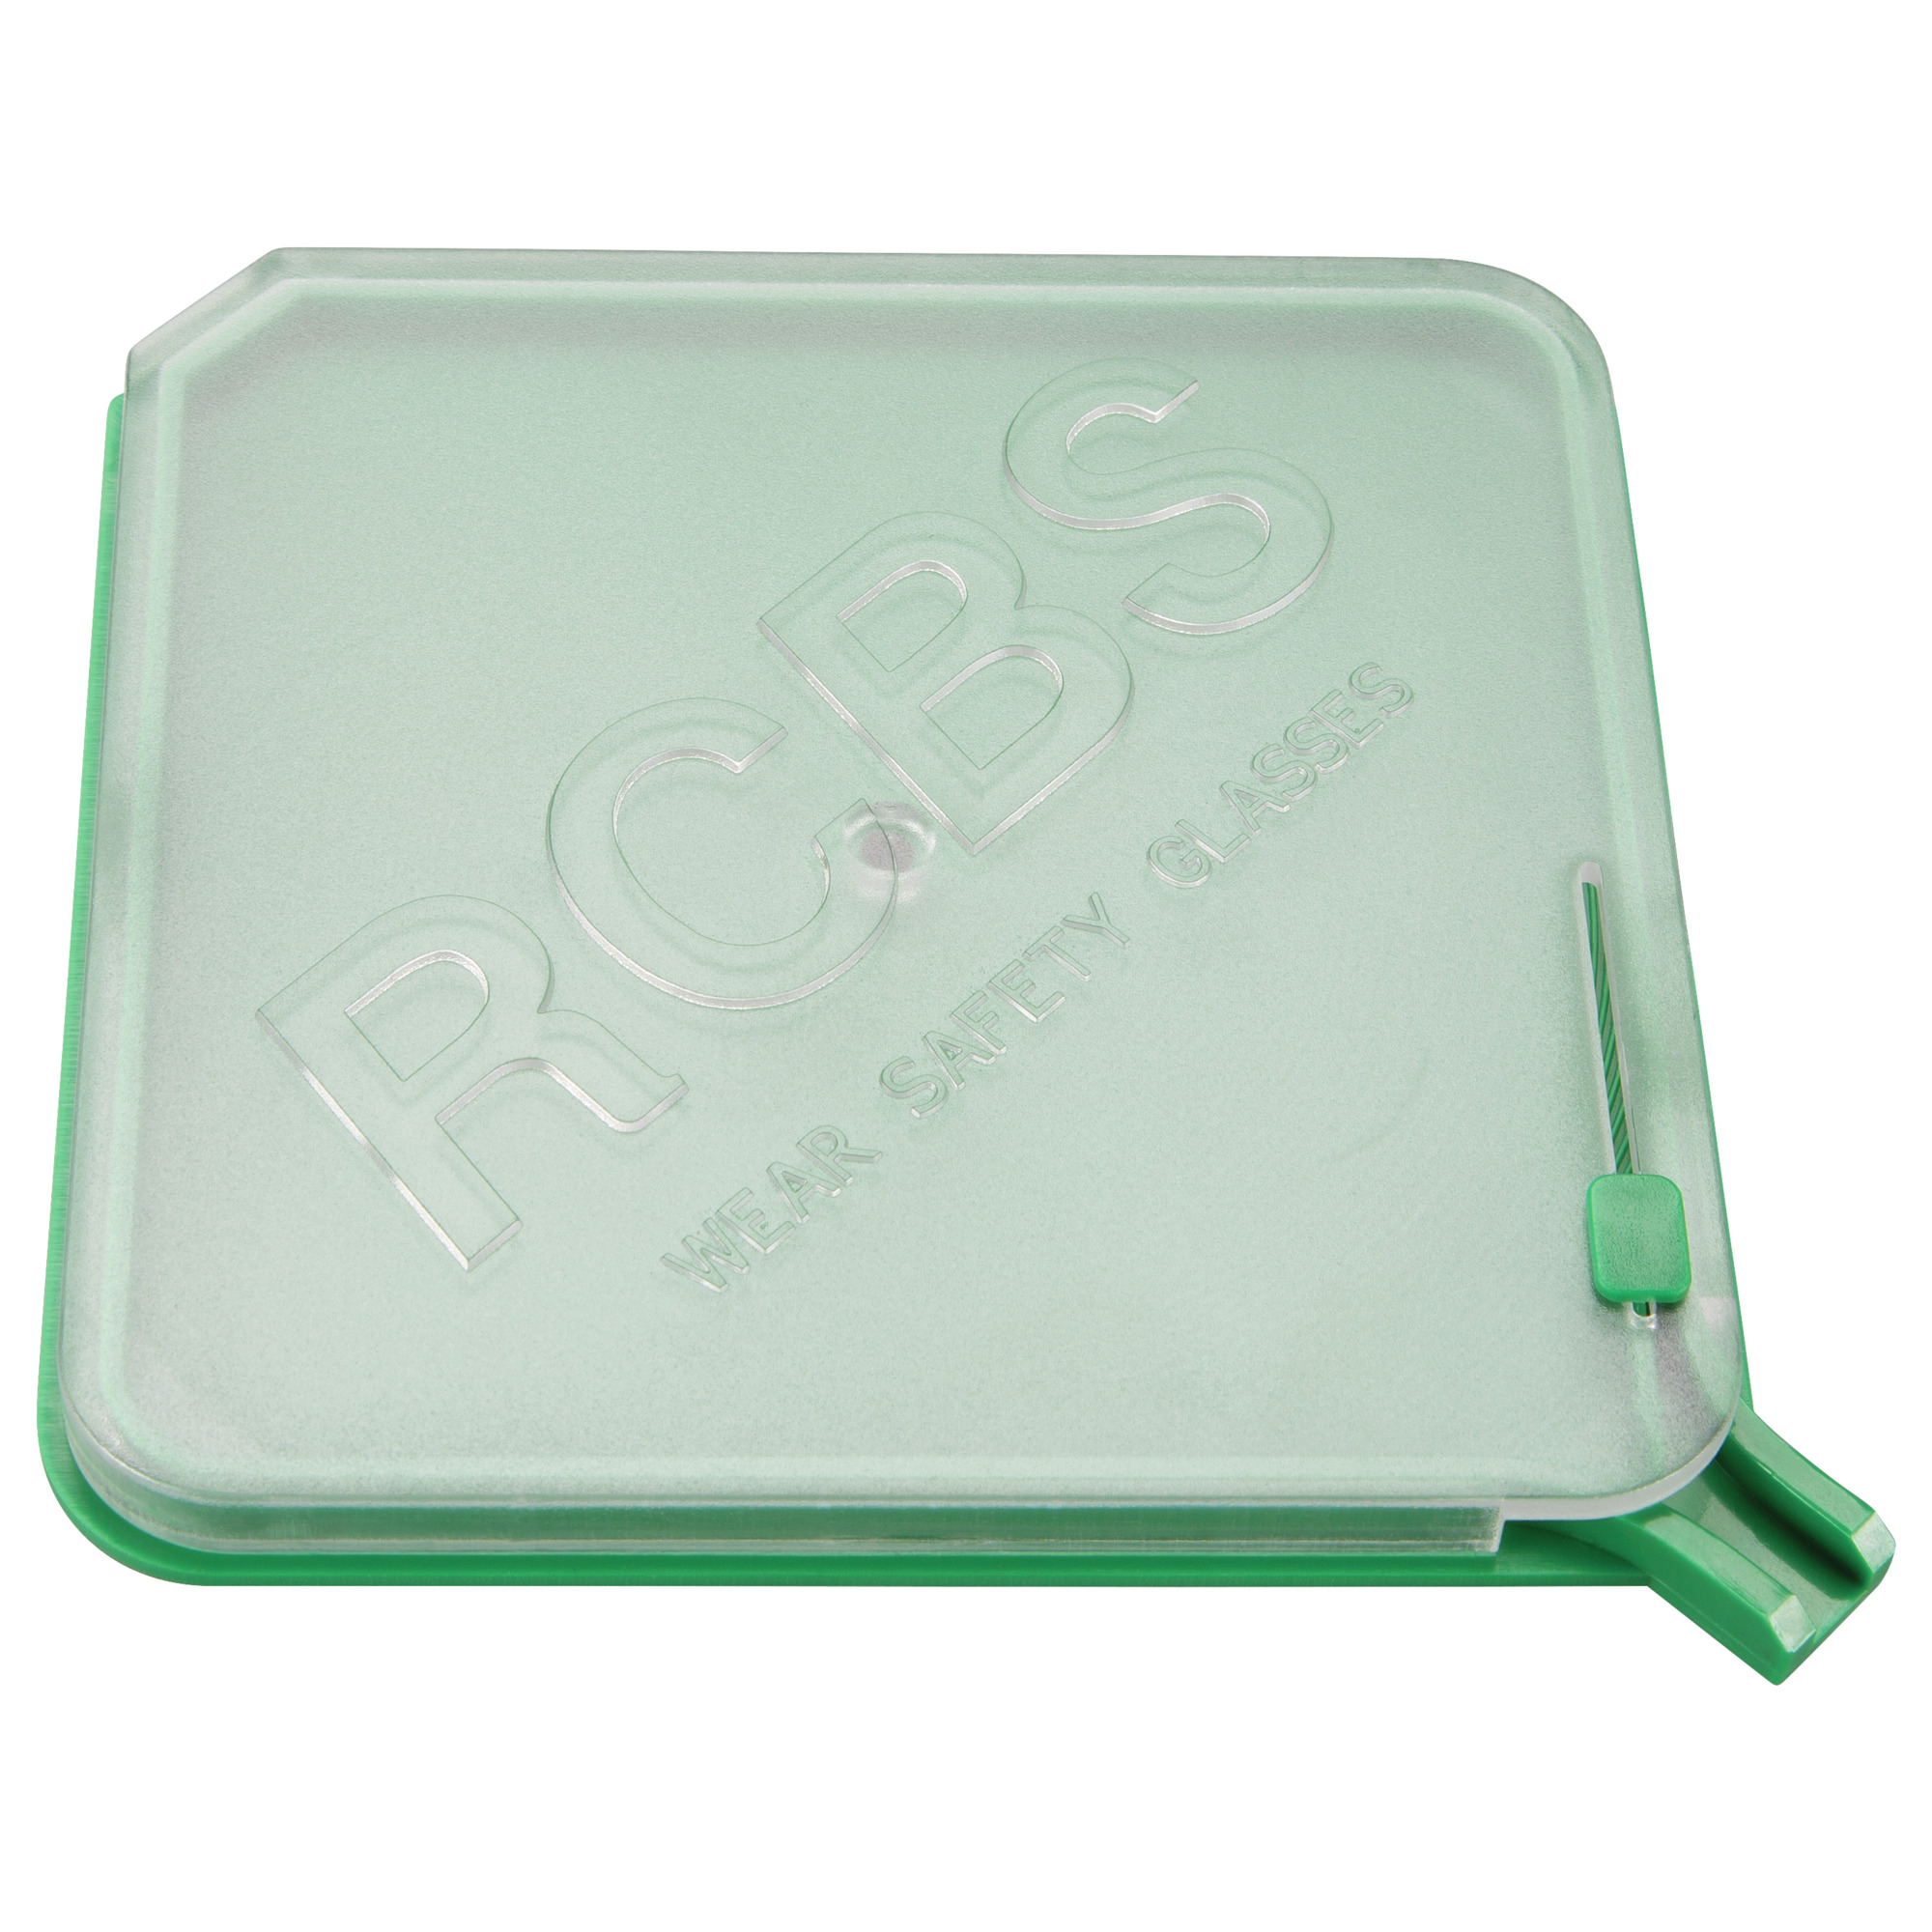 Rcbs Universal Durable Cast Metal Hand Priming Guard Tool w/Tray 90200 